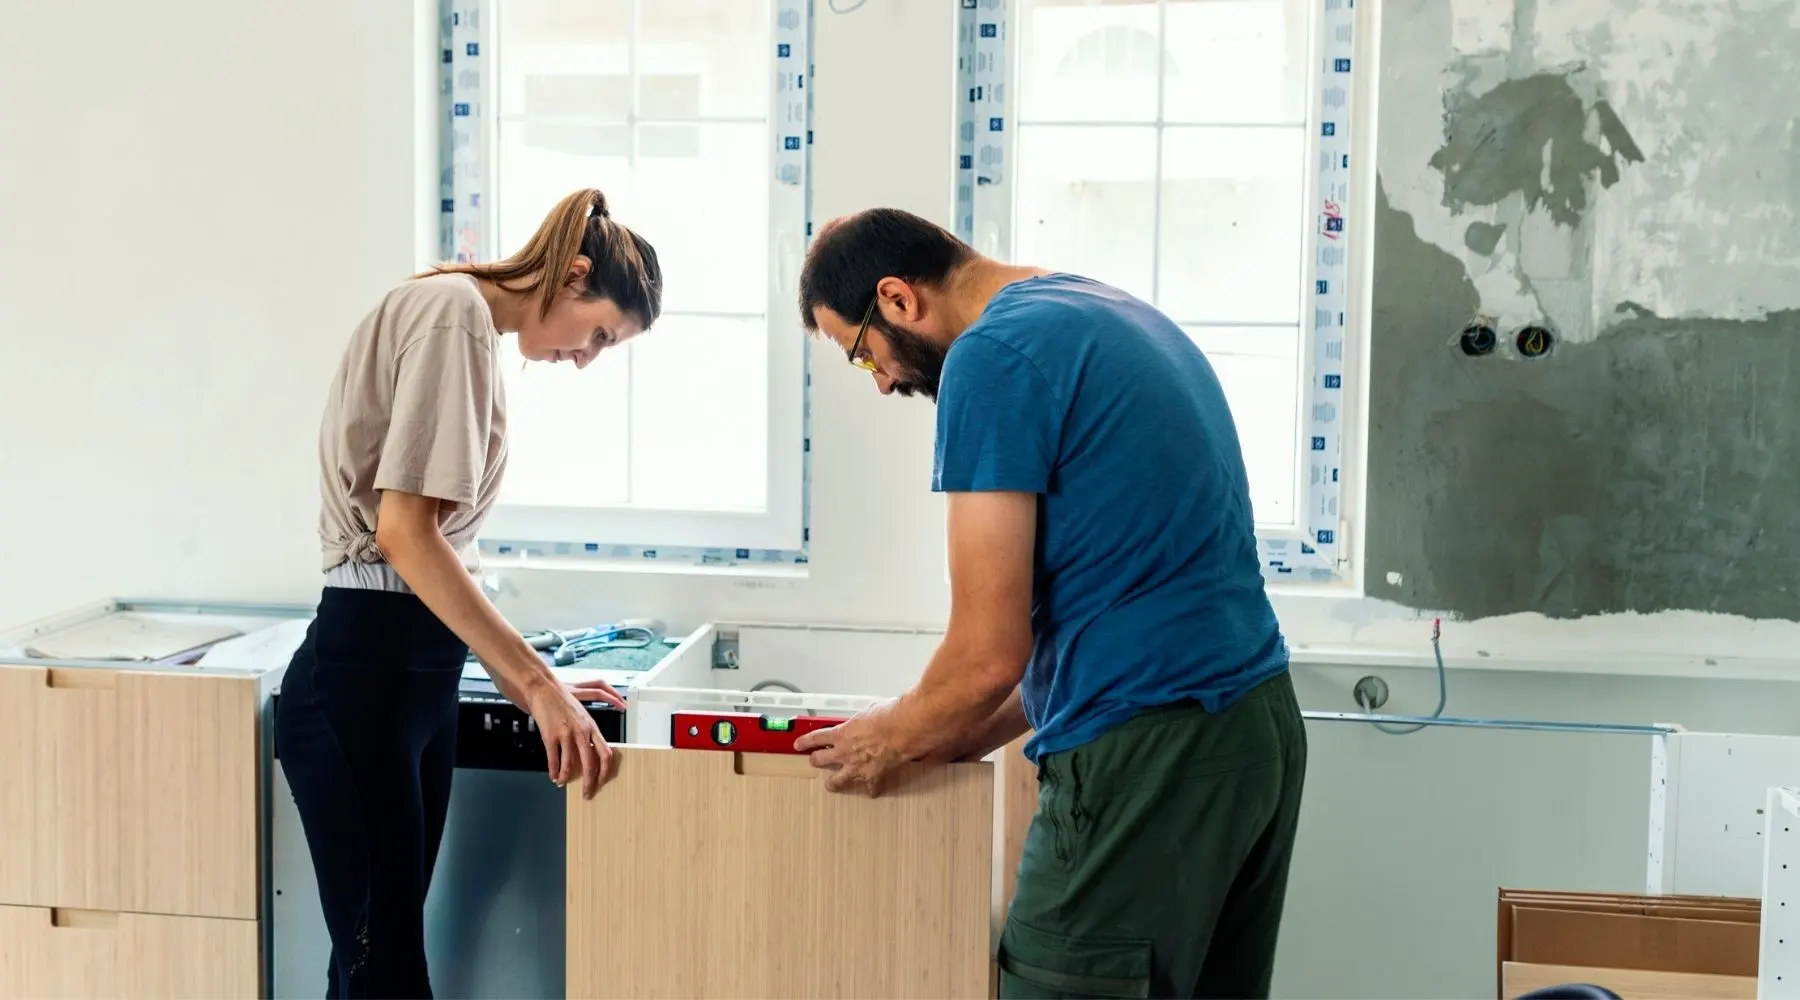 Father and his daughter with hearing aid installing furniture together.